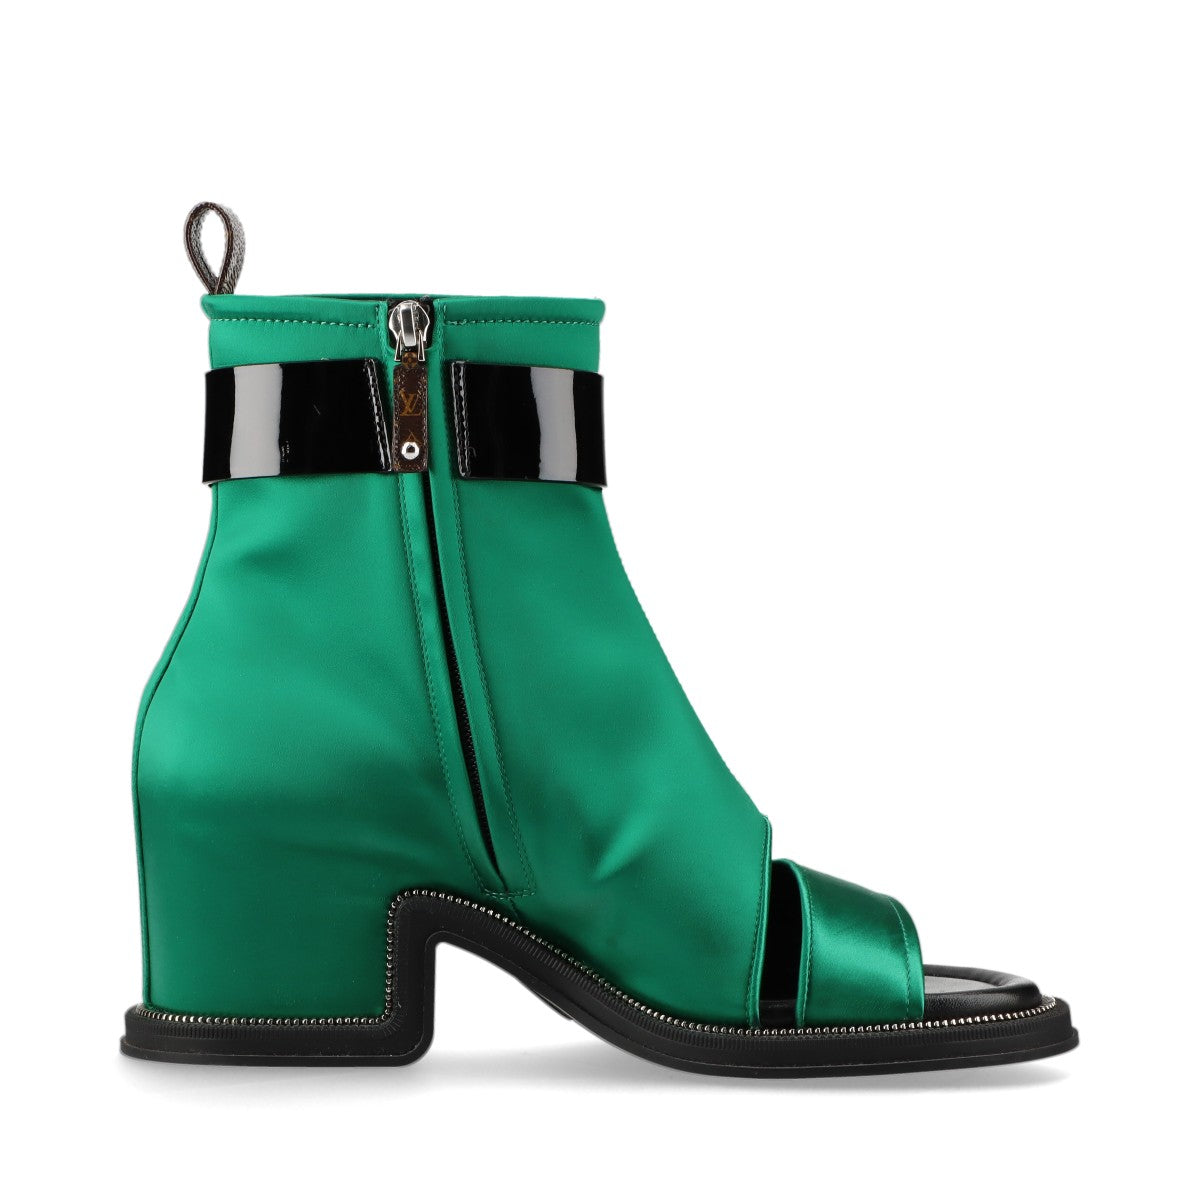 Louis Vuitton moonlight line 22 years Satin x Leather Short Boots EU38 Ladies' Green x black NL0212 Box There is a bag